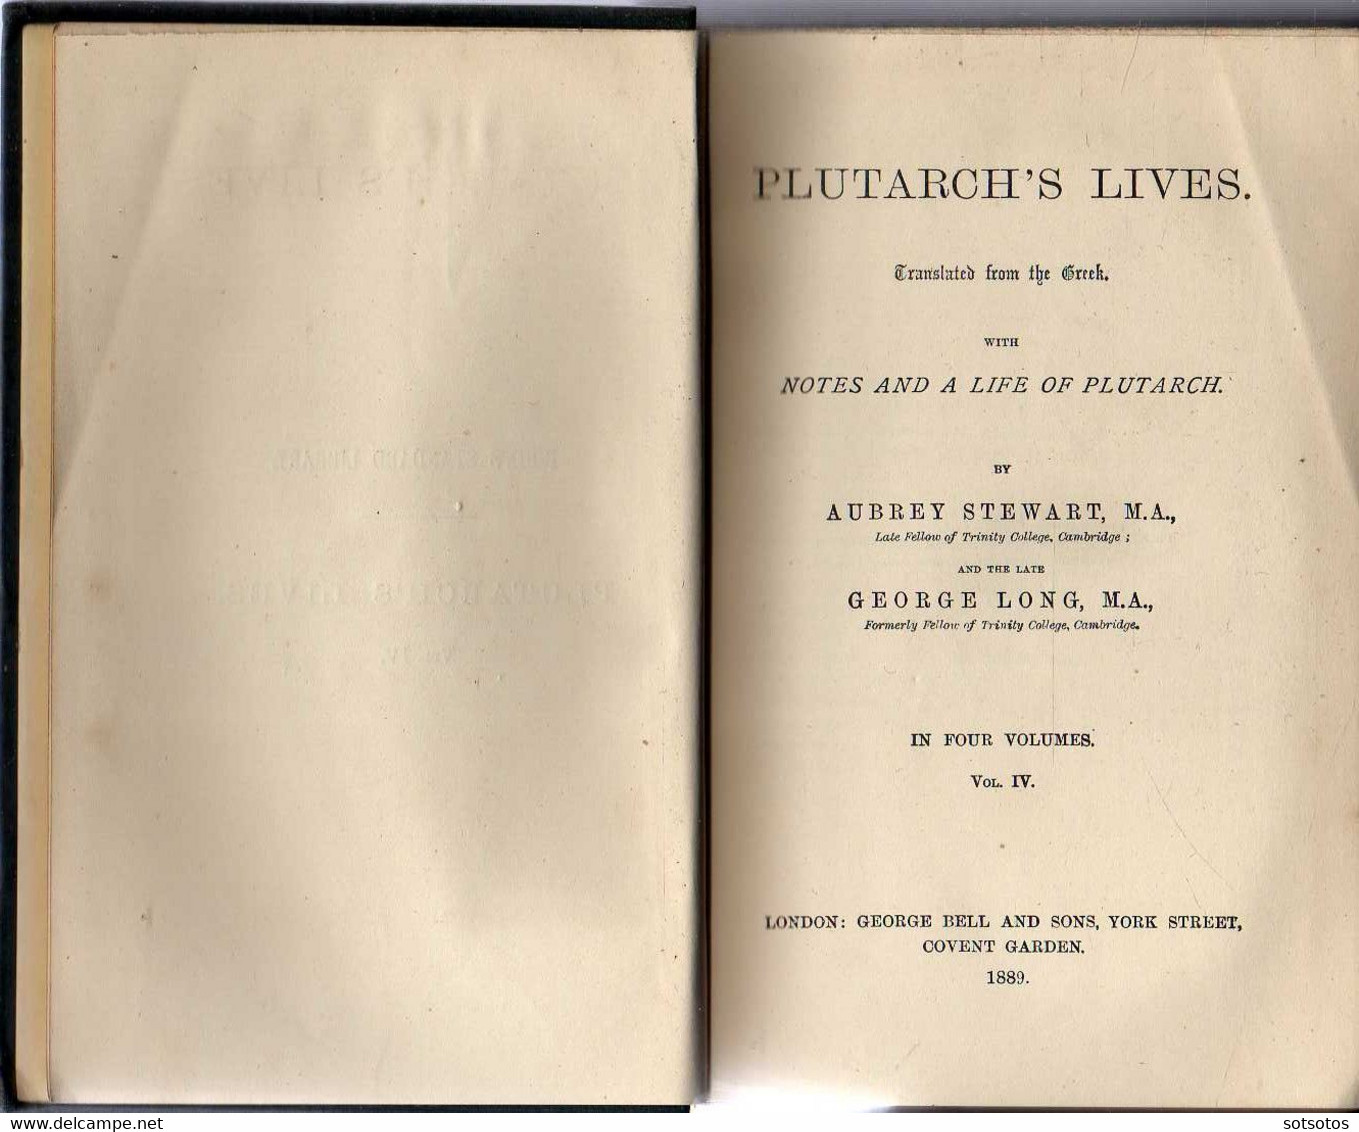 Plutarch's Lives  translated from the Greek with Notes and a Life of Plutarch by Aubrey Stewart and the Late George Long